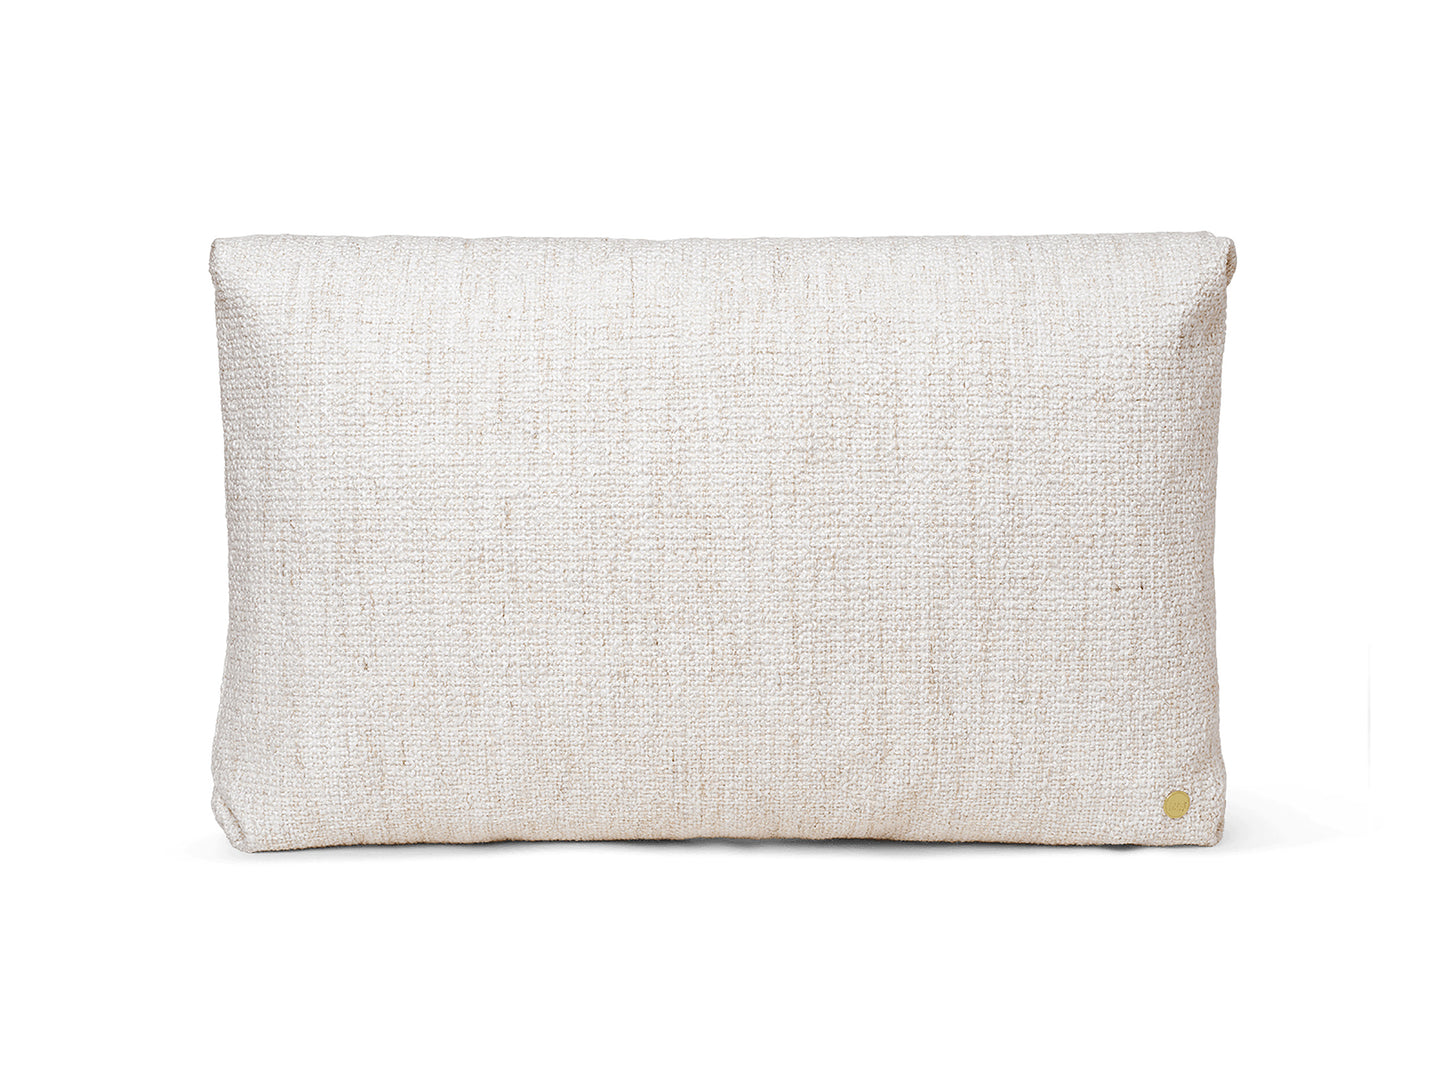 Off-White Boucle Clean Cushion by Ferm Living